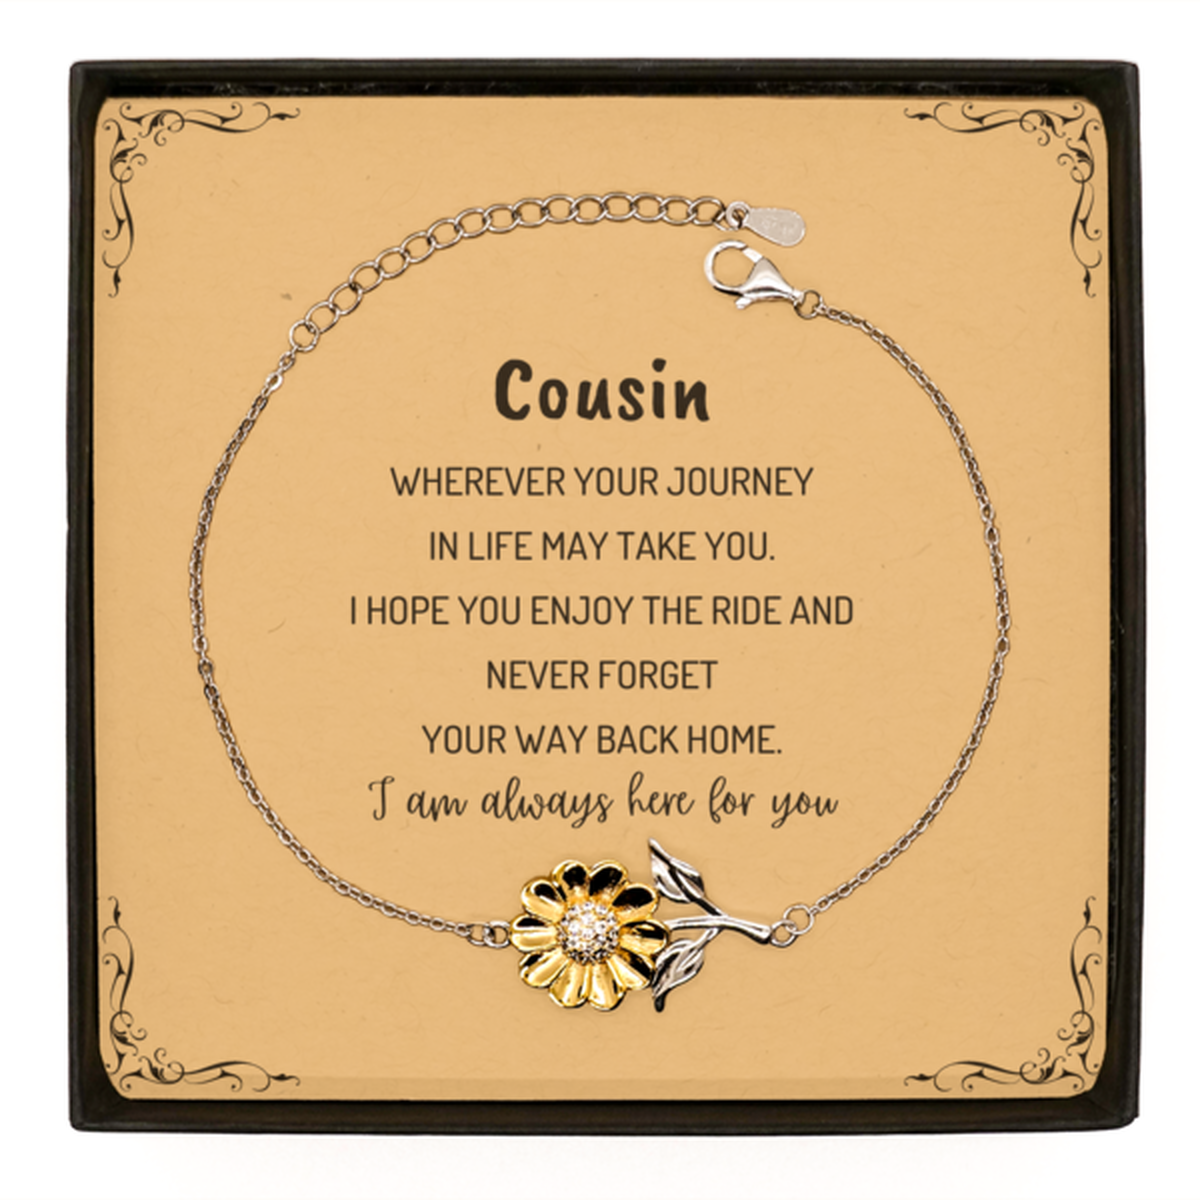 Cousin wherever your journey in life may take you, I am always here for you Cousin Sunflower Bracelet, Awesome Christmas Gifts For Cousin Message Card, Cousin Birthday Gifts for Men Women Family Loved One